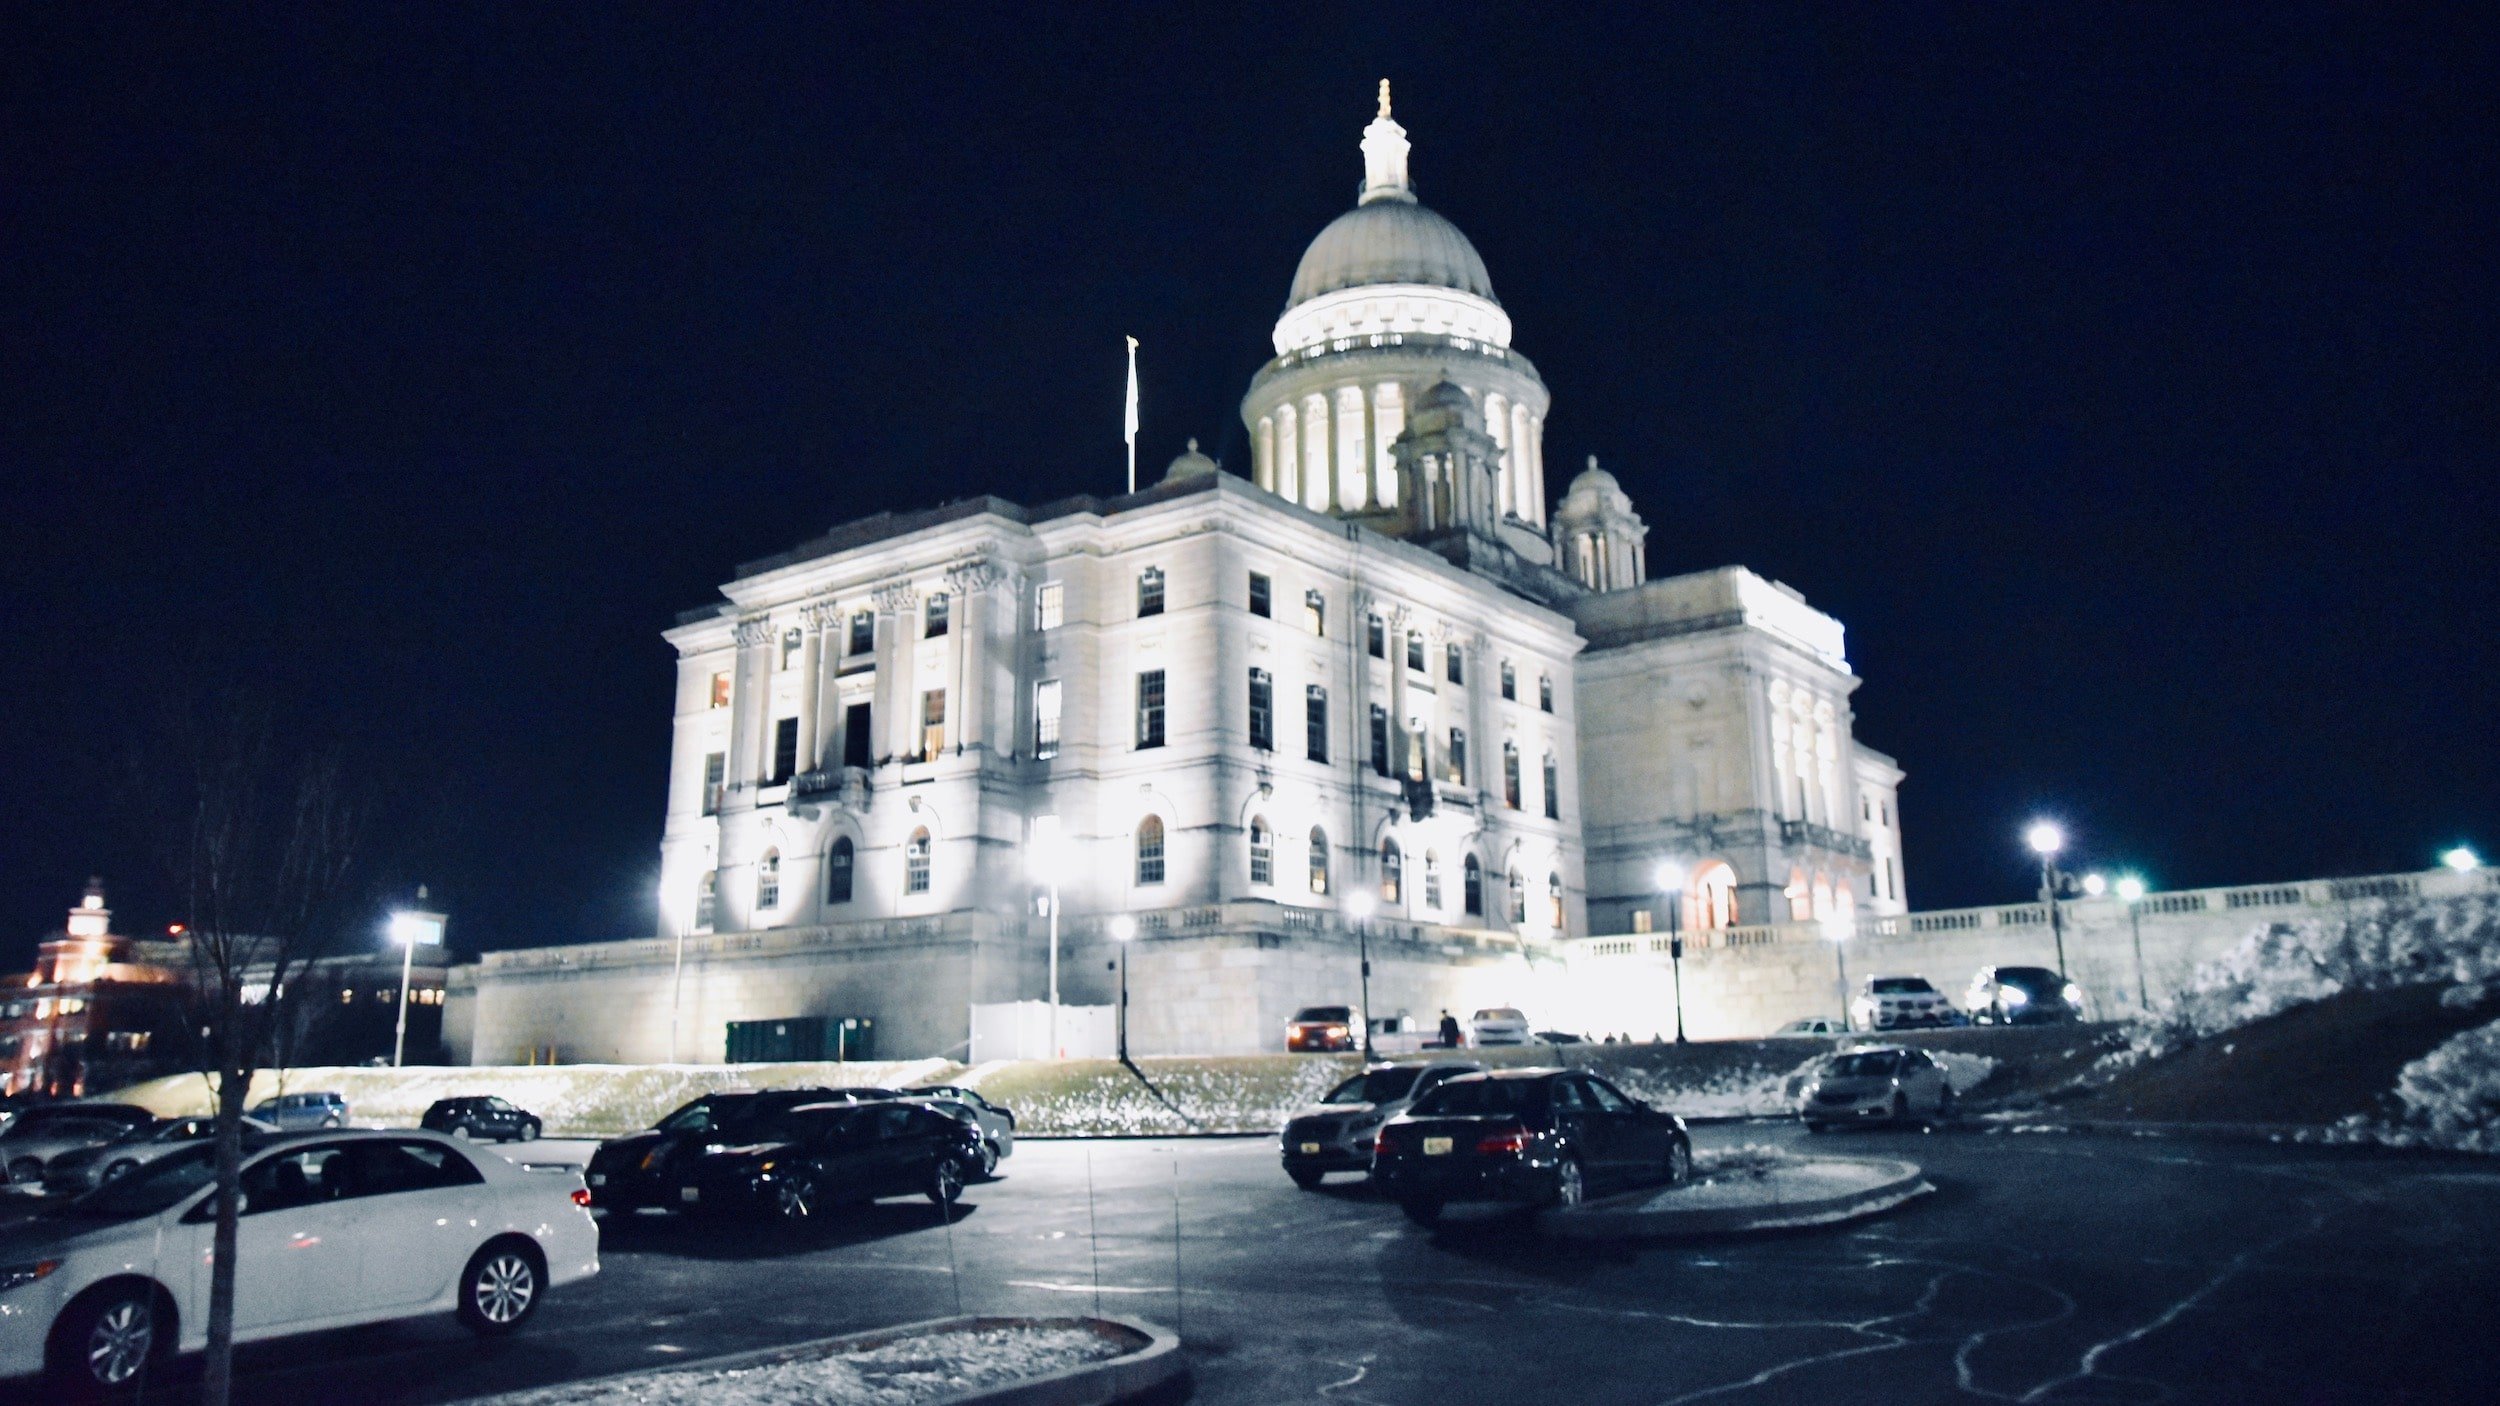 Rhode Island: Cleaning up cronyism takes upstream solutions